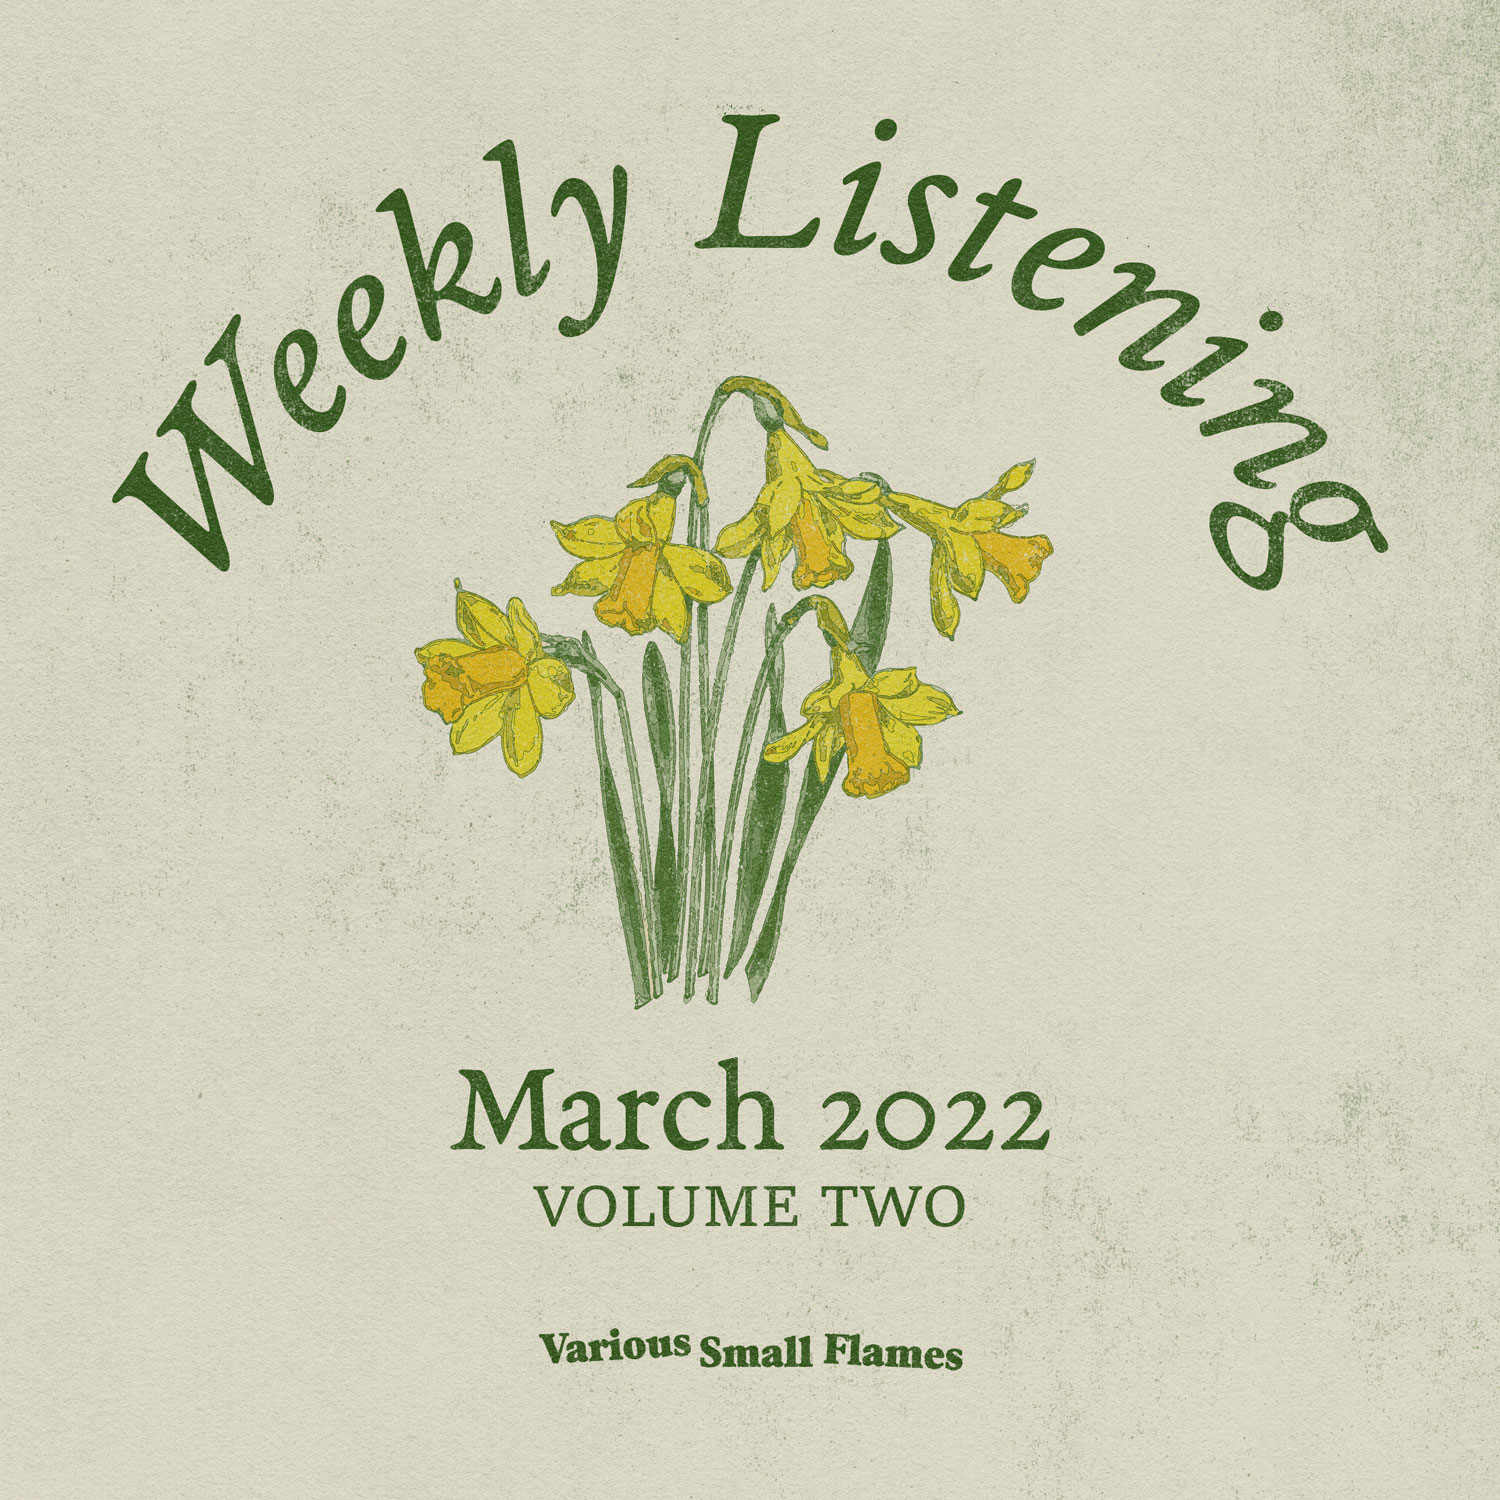 weekly listening march 2022, volume 2 with an illustration of daffodils